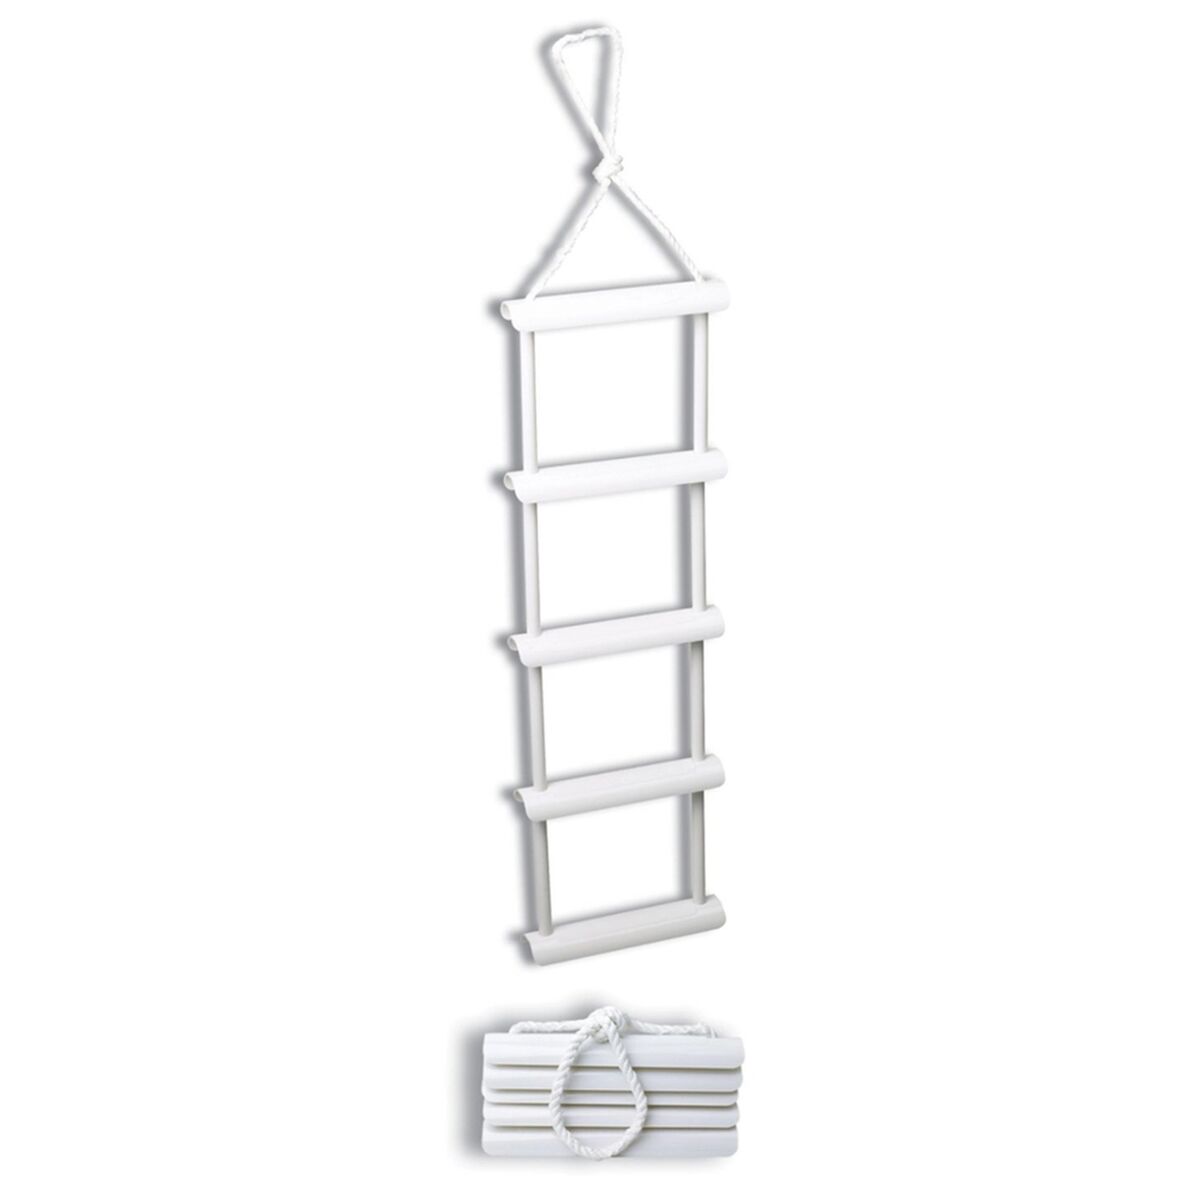 5 Step Rope Ladder Boat Accessory